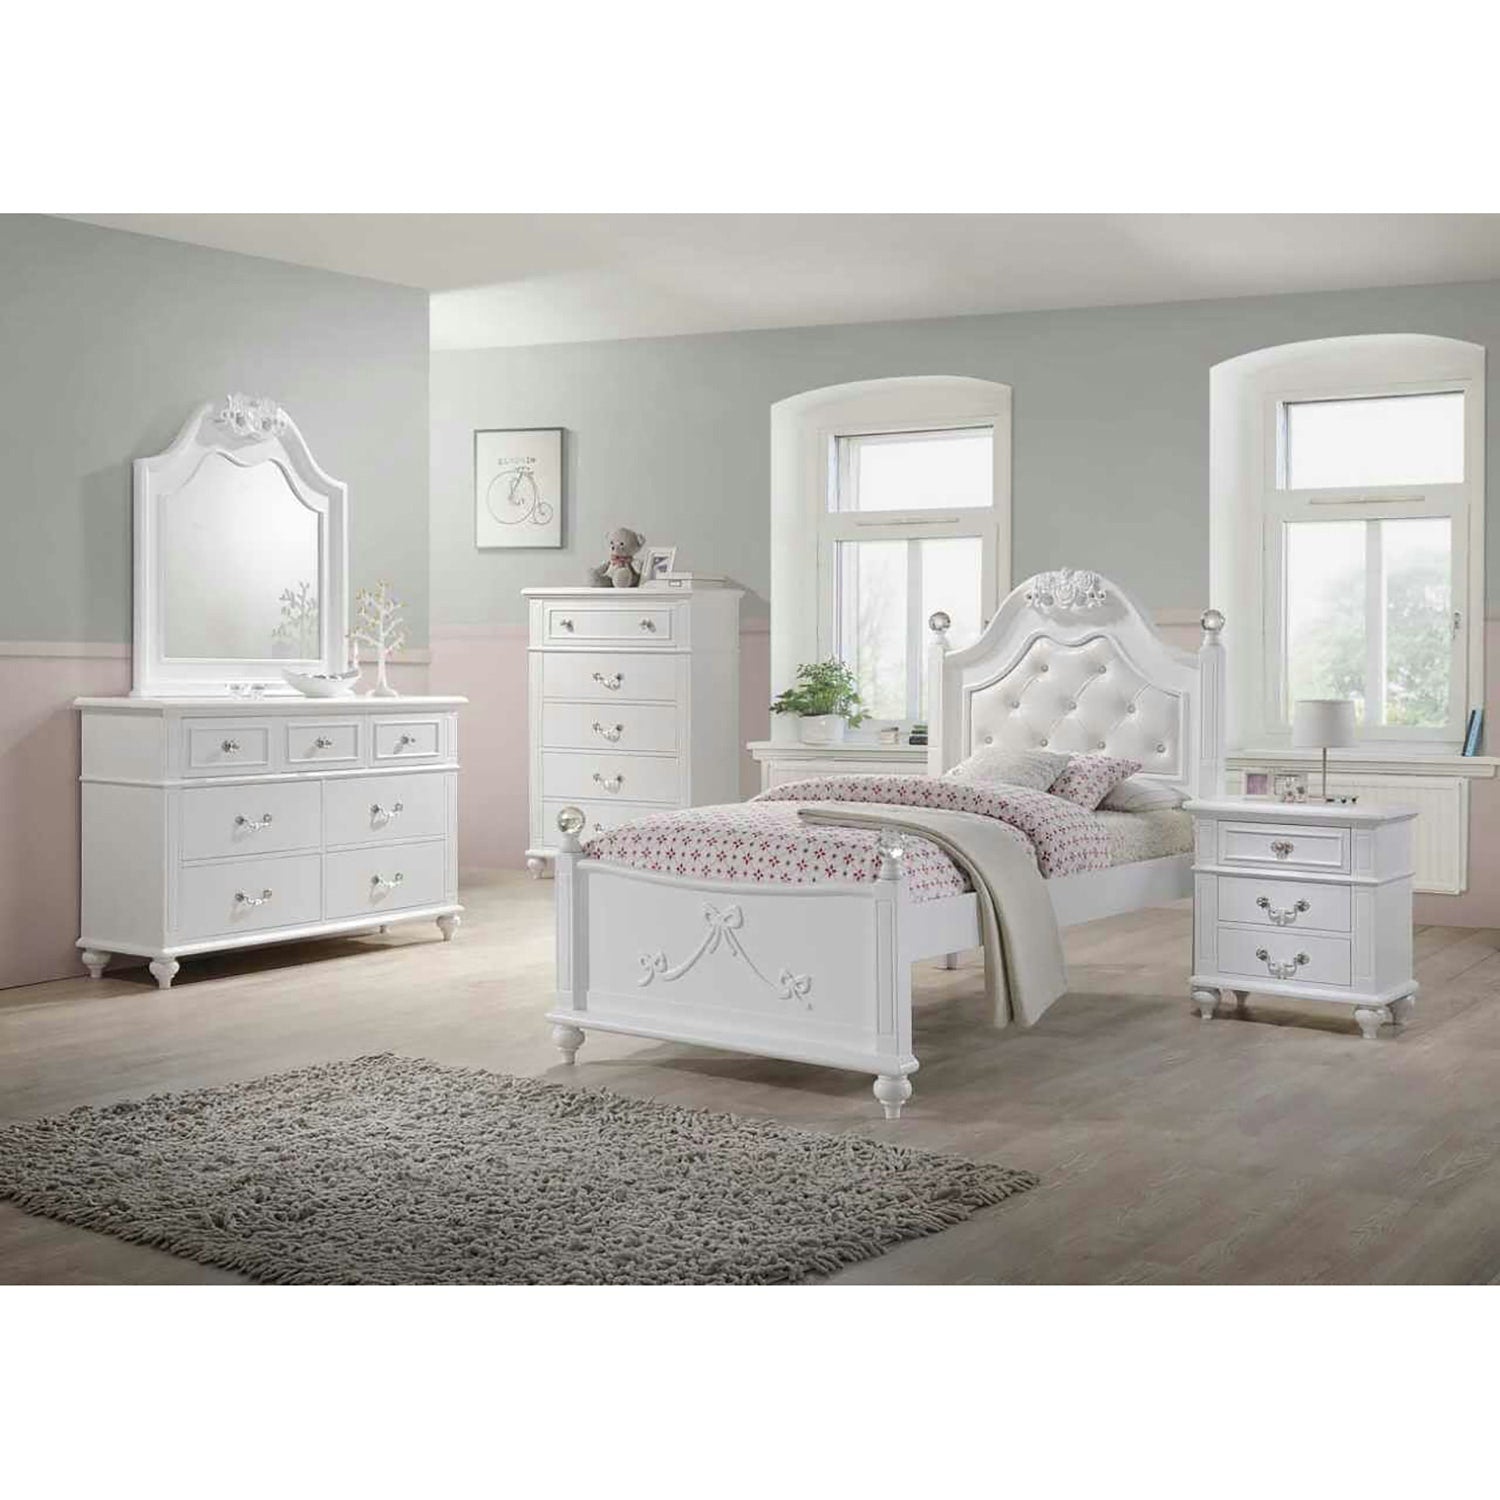 Alana Youth Bedroom Collection